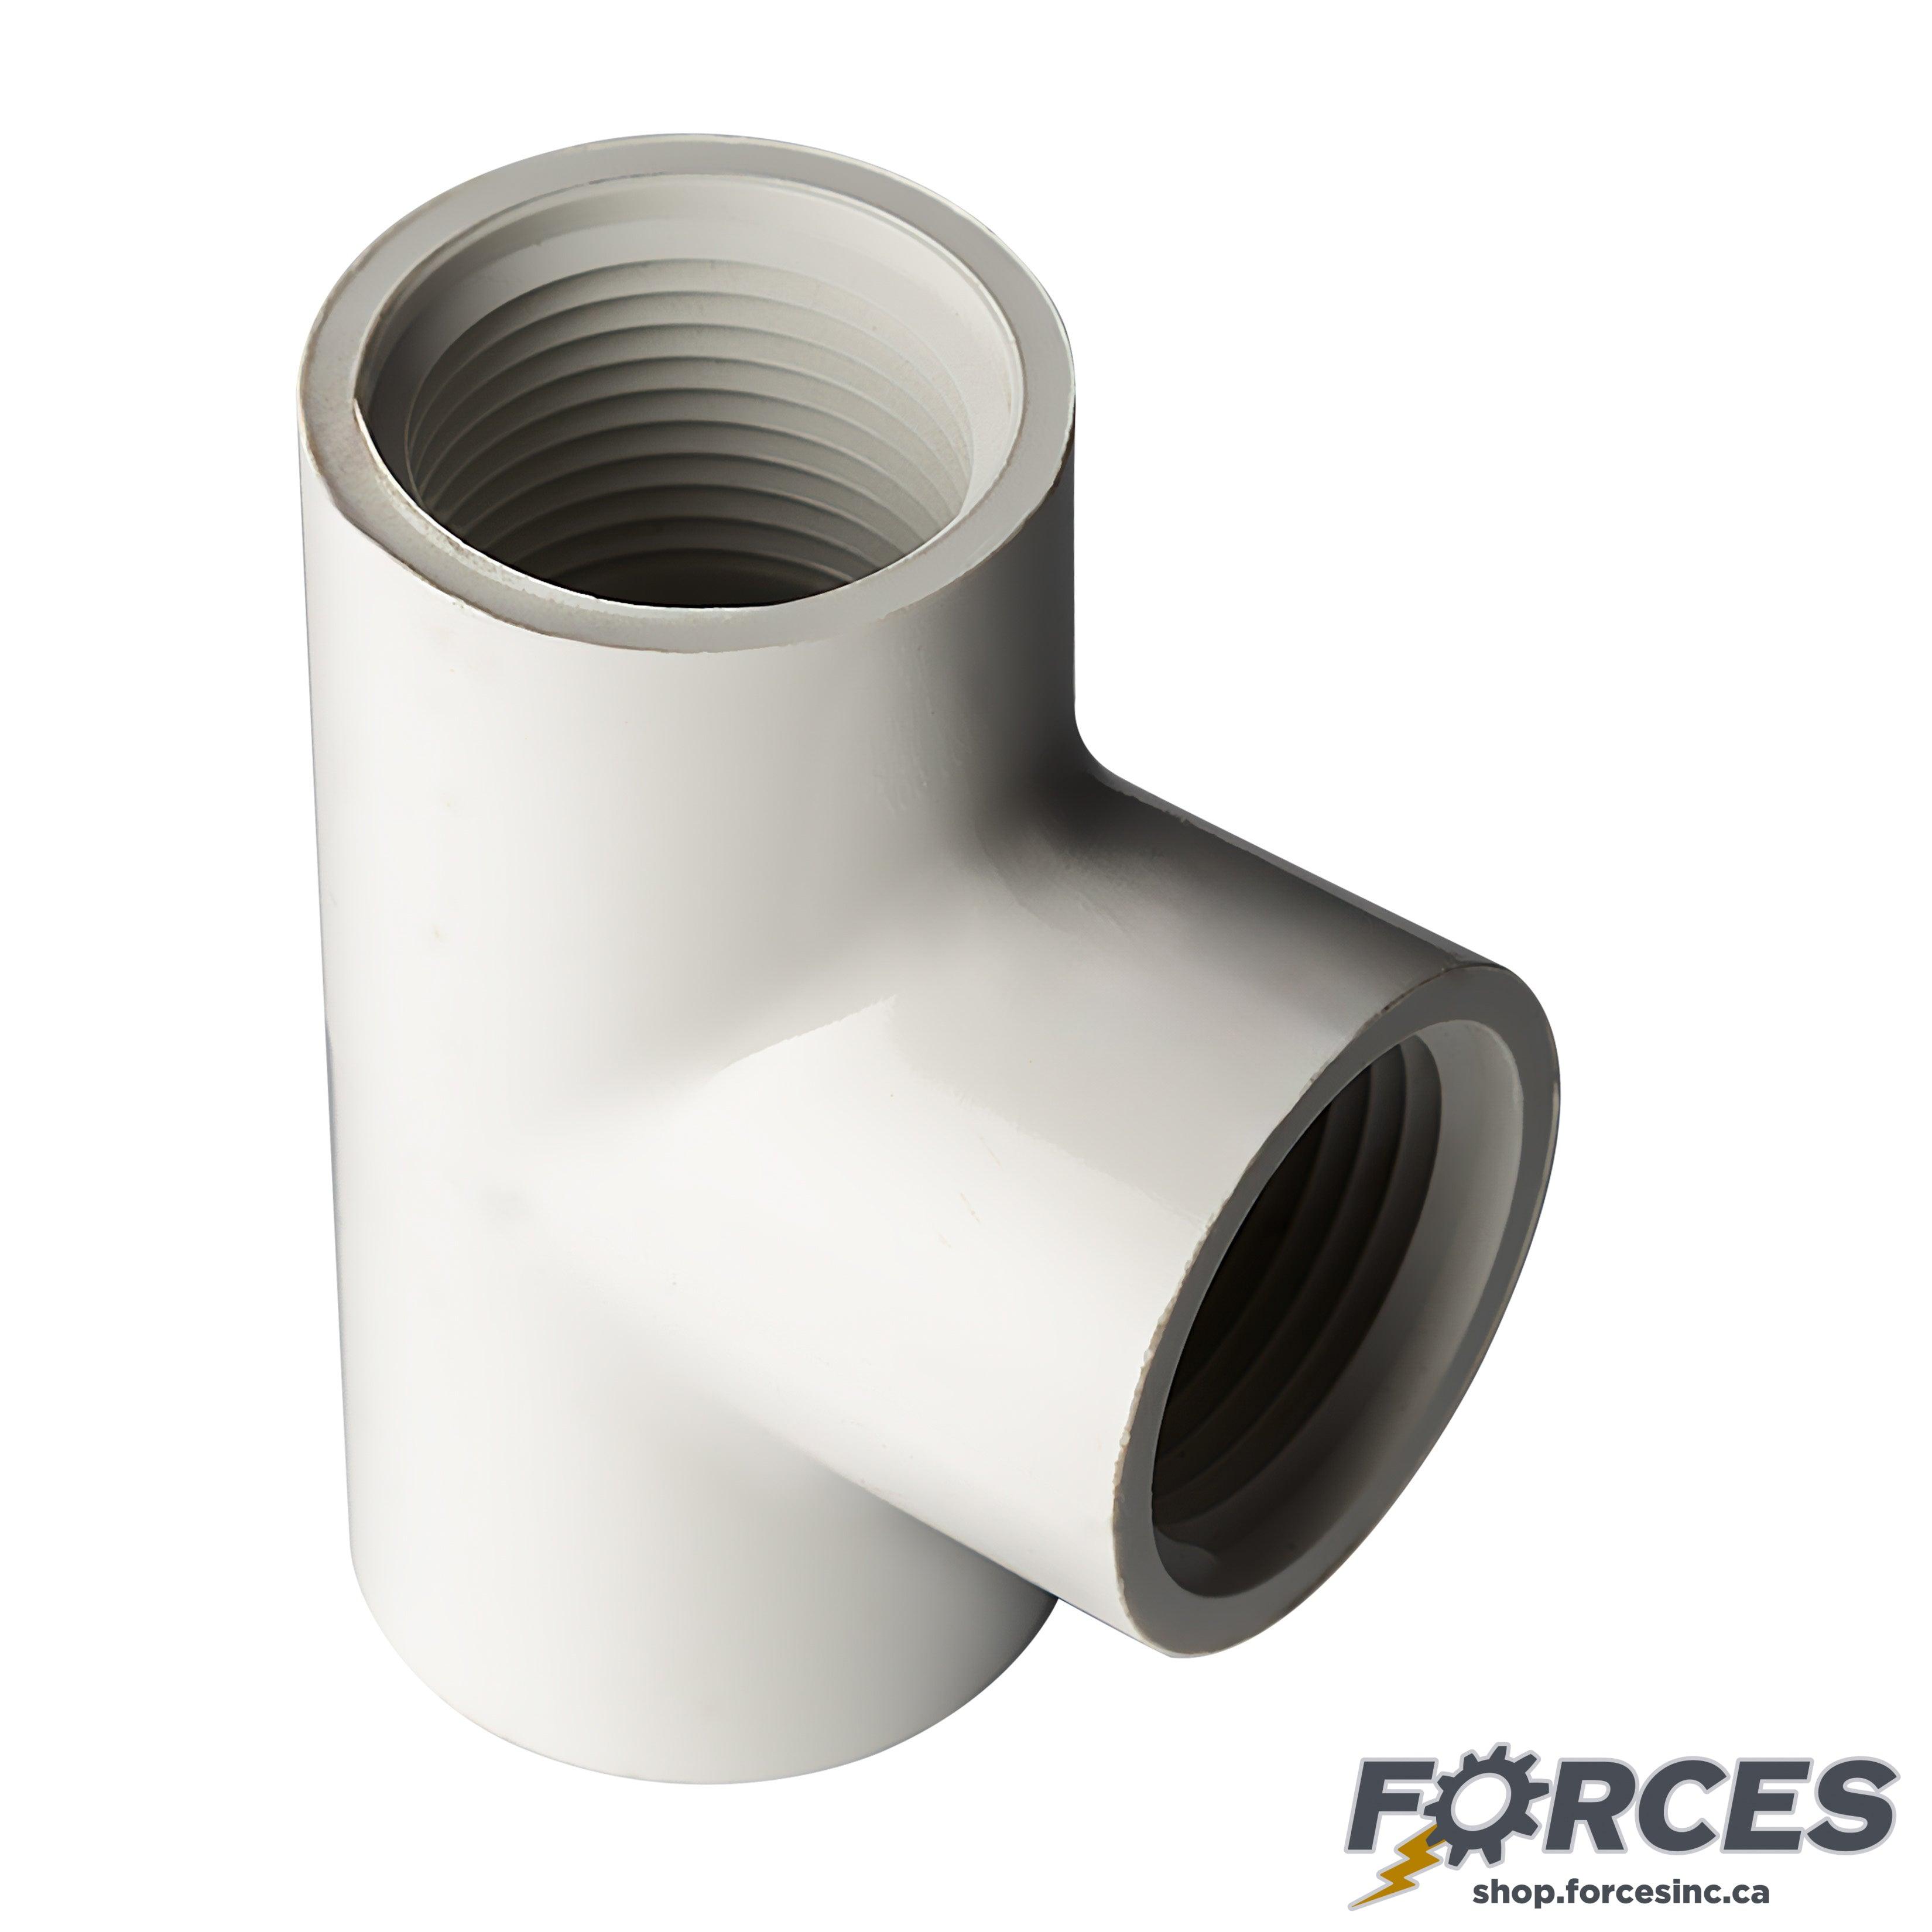 3/4" Tee (Threaded) Sch 40 - PVC white | 405007W - Forces Inc